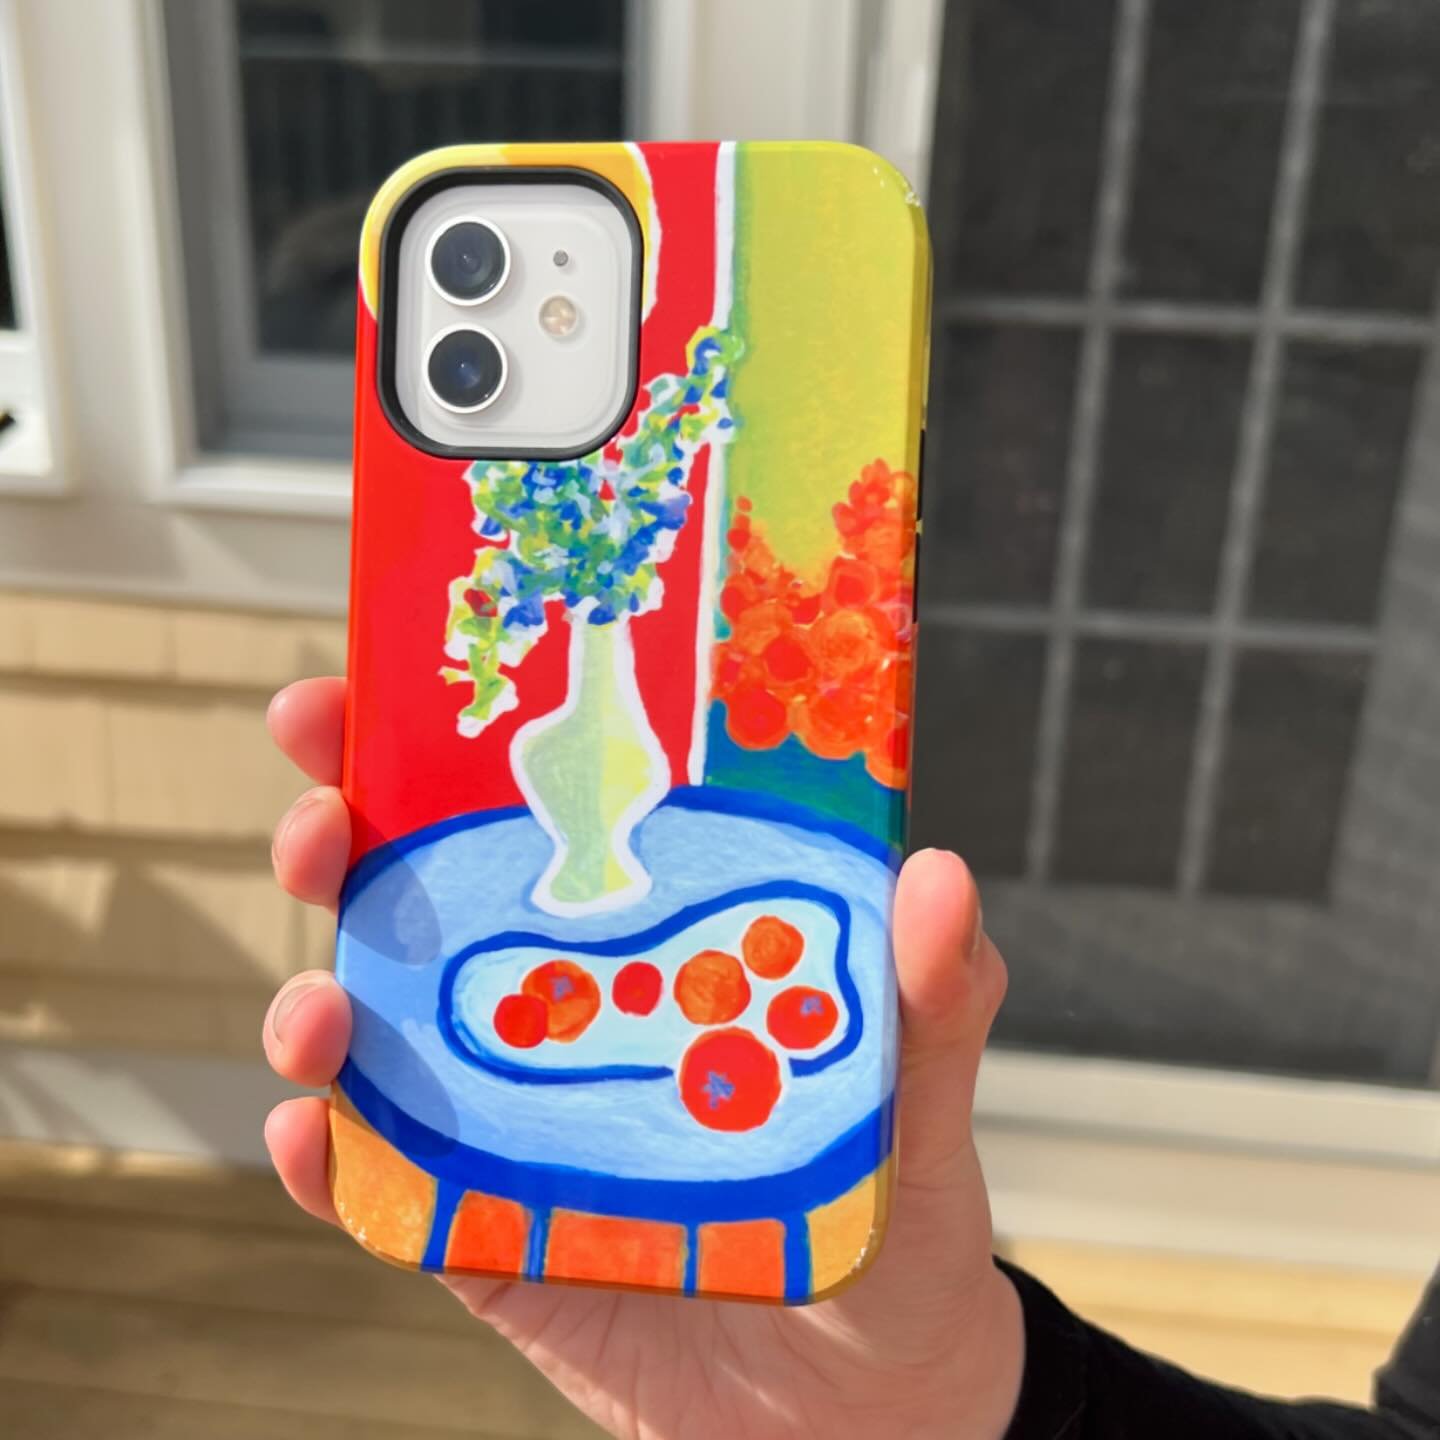 TODAY&rsquo;S DAILY DEAL from @society6 ~
40% off PHONE CASES! 
Slim case $15/ tough case $18! 
I have a tough case and it is tough!! 🥳

Check out my story for some designs that are perfect 🤩 for summer 💫💫💫

#happeningtoday #society6 #dailydeal 